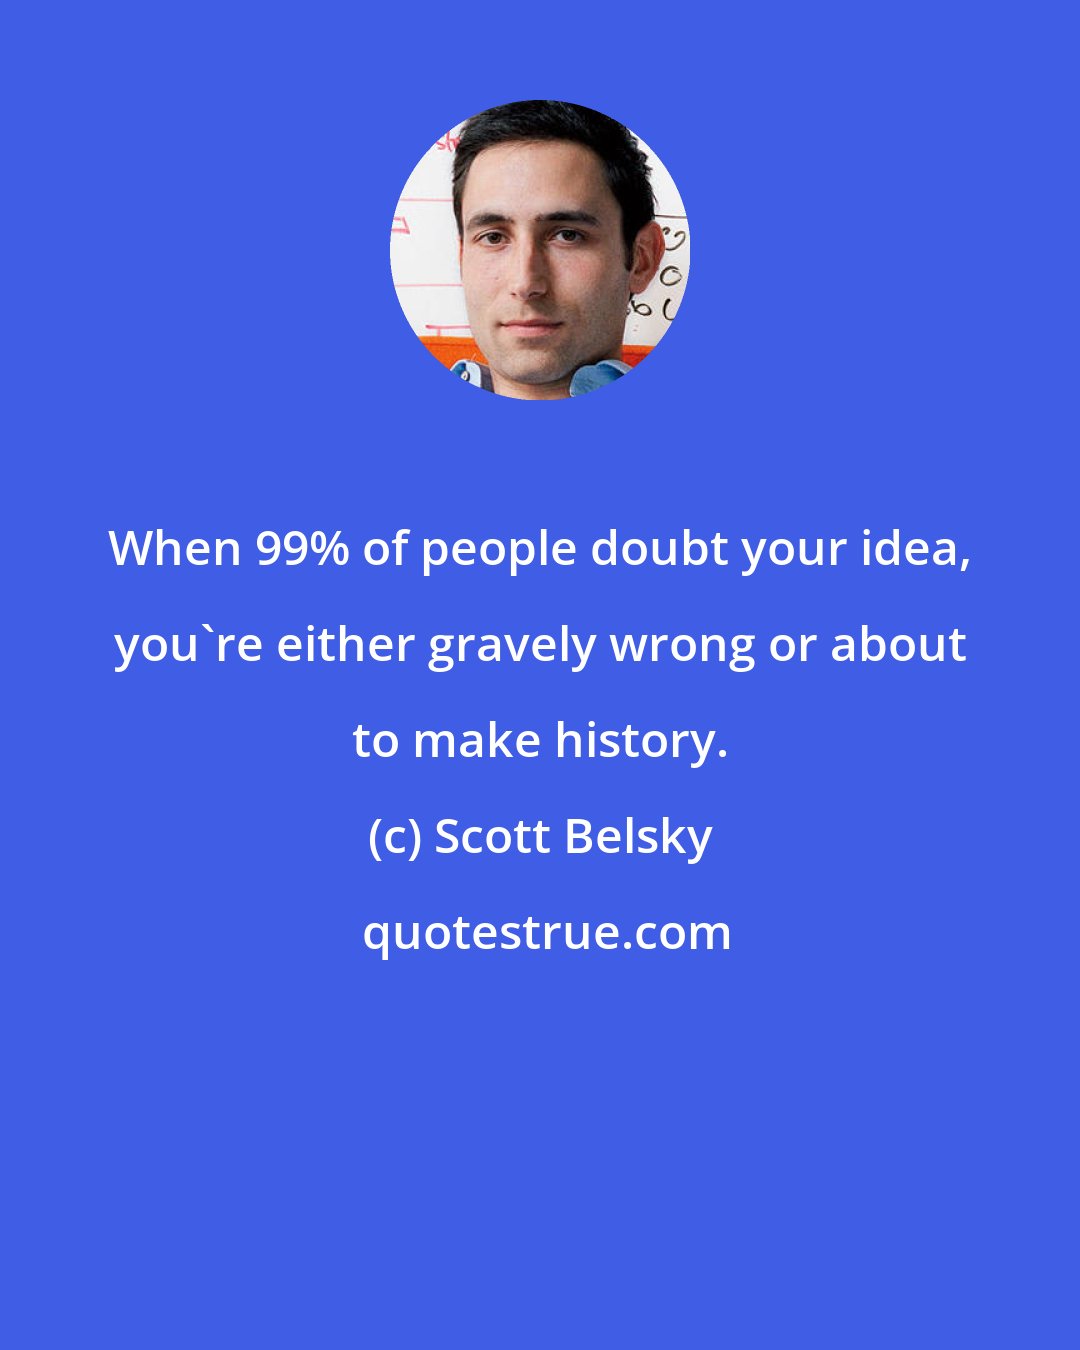 Scott Belsky: When 99% of people doubt your idea, you're either gravely wrong or about to make history.